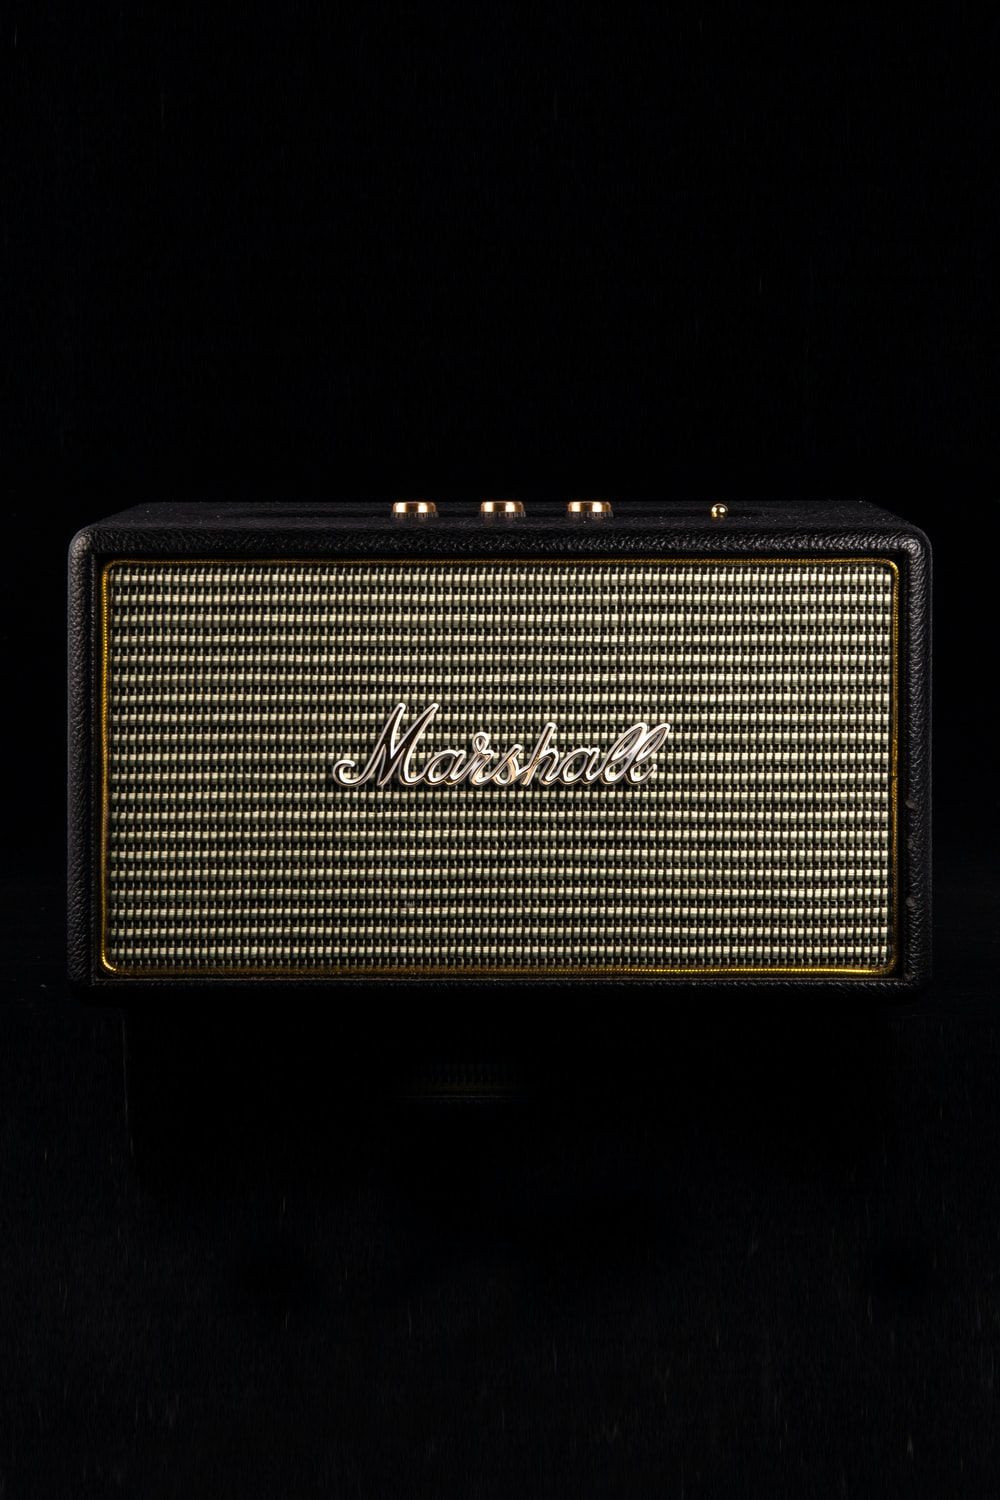 Guitar Amp Picture. Download Free Image